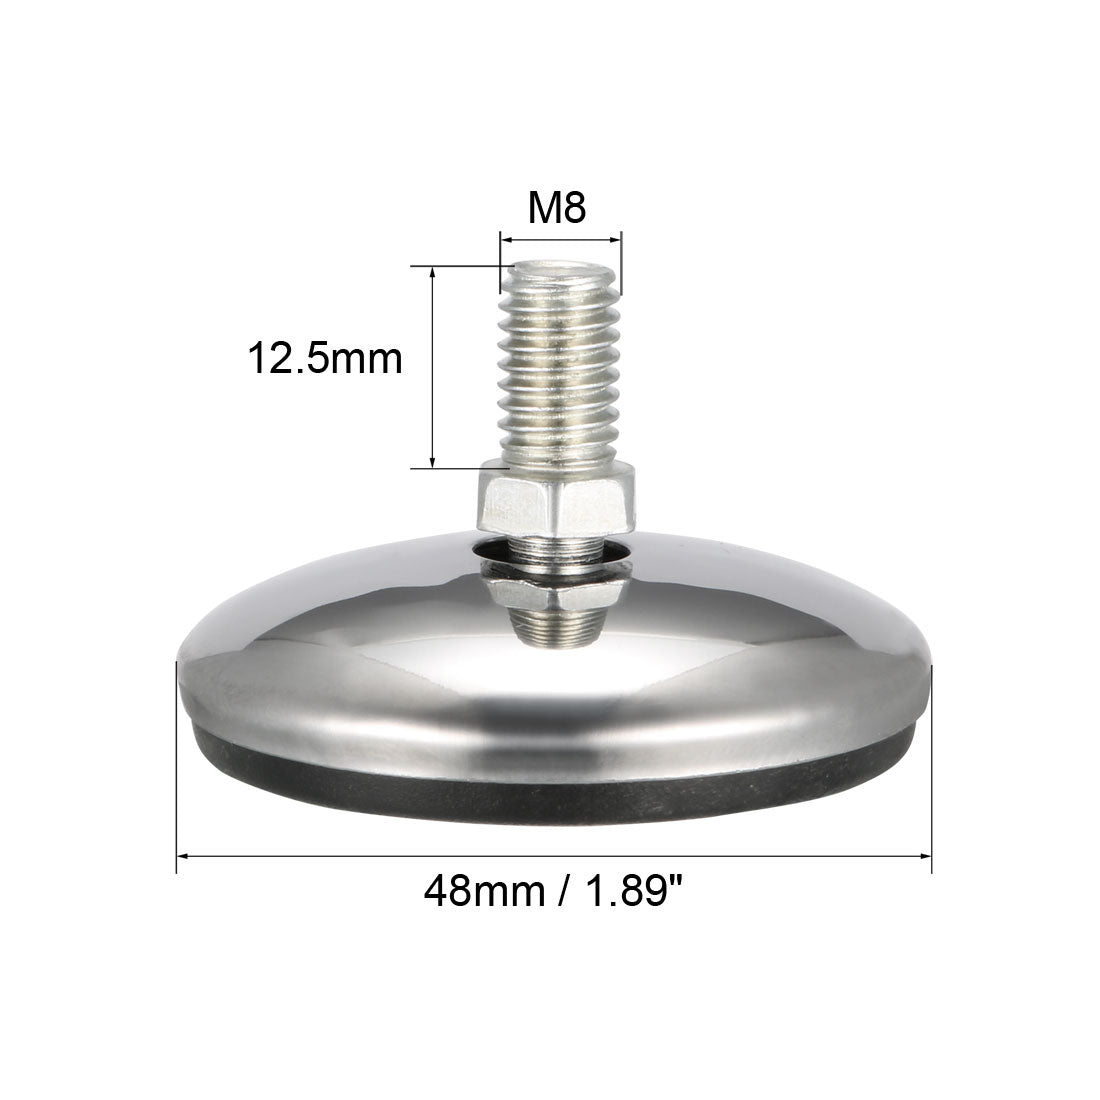 uxcell Uxcell Furniture Levelers, 18mm to 22mm Adjustable Height M8 x 12.5mm Threaded, 16Pcs